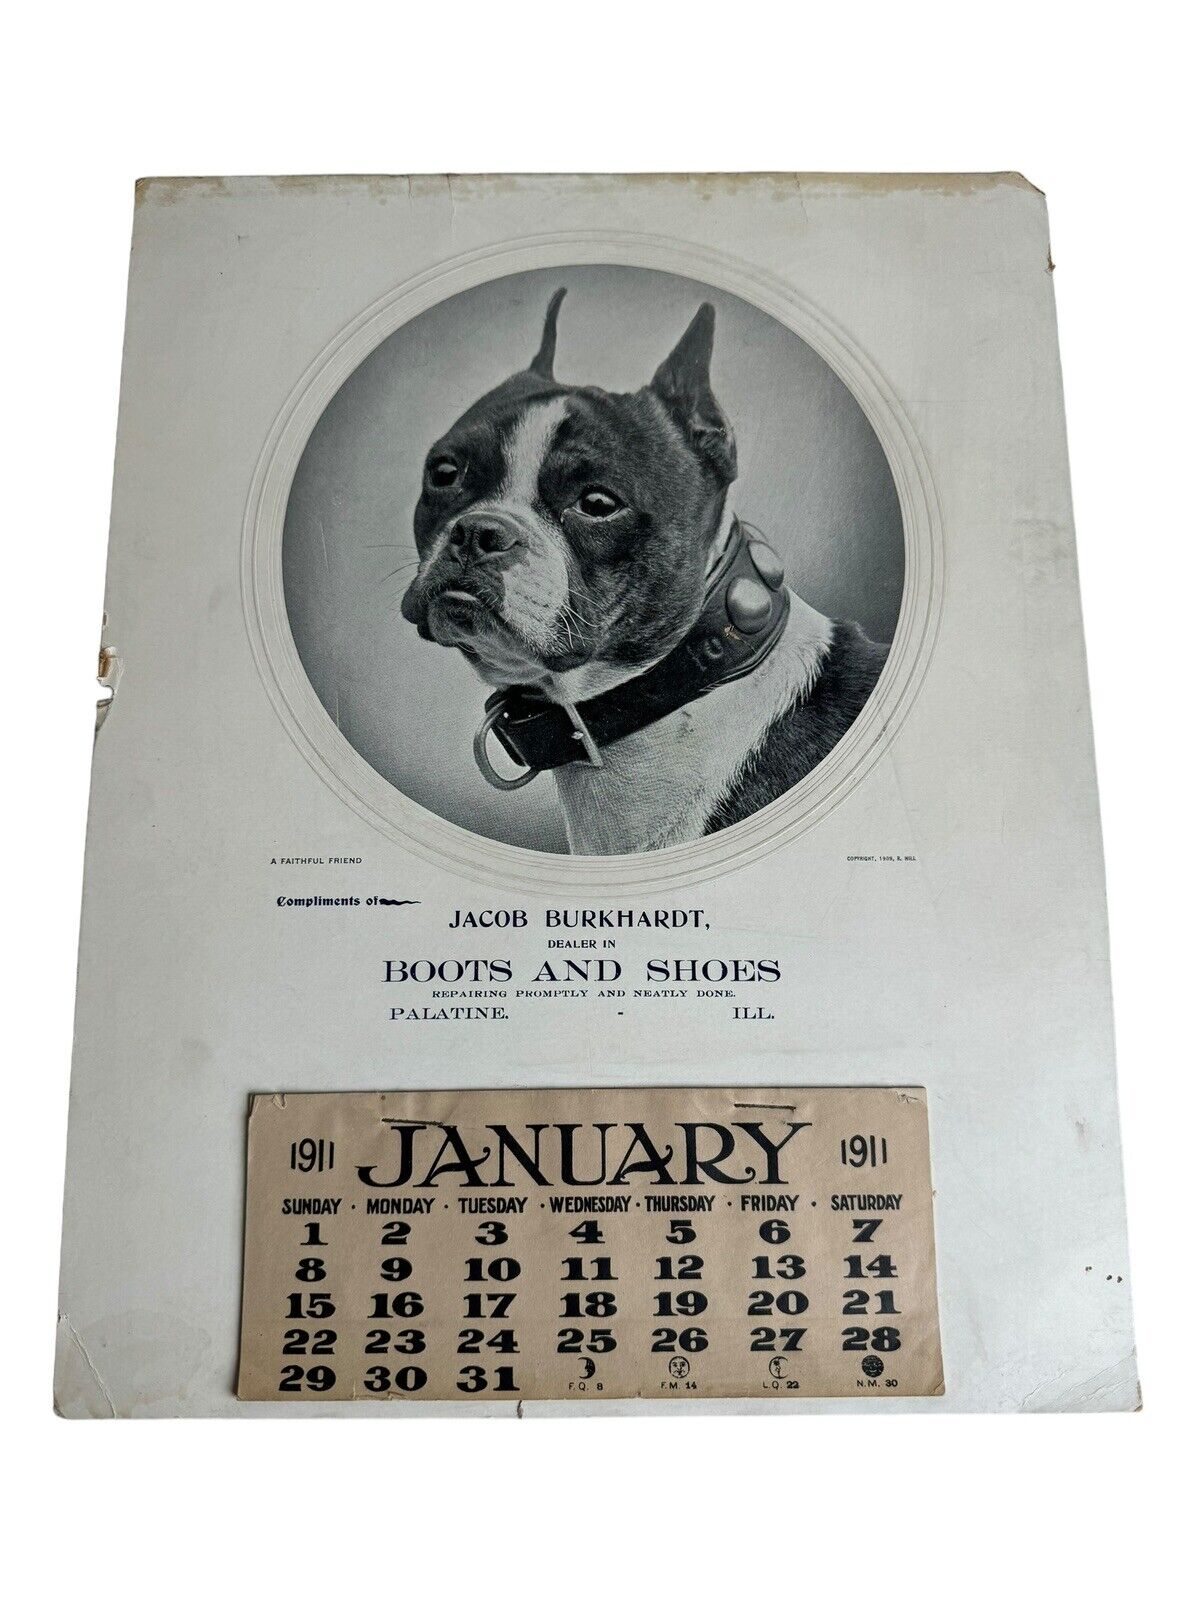 RARE Antique 1911 CALENDAR BY R HILL OLD Boston Terrier Palatine Illinois